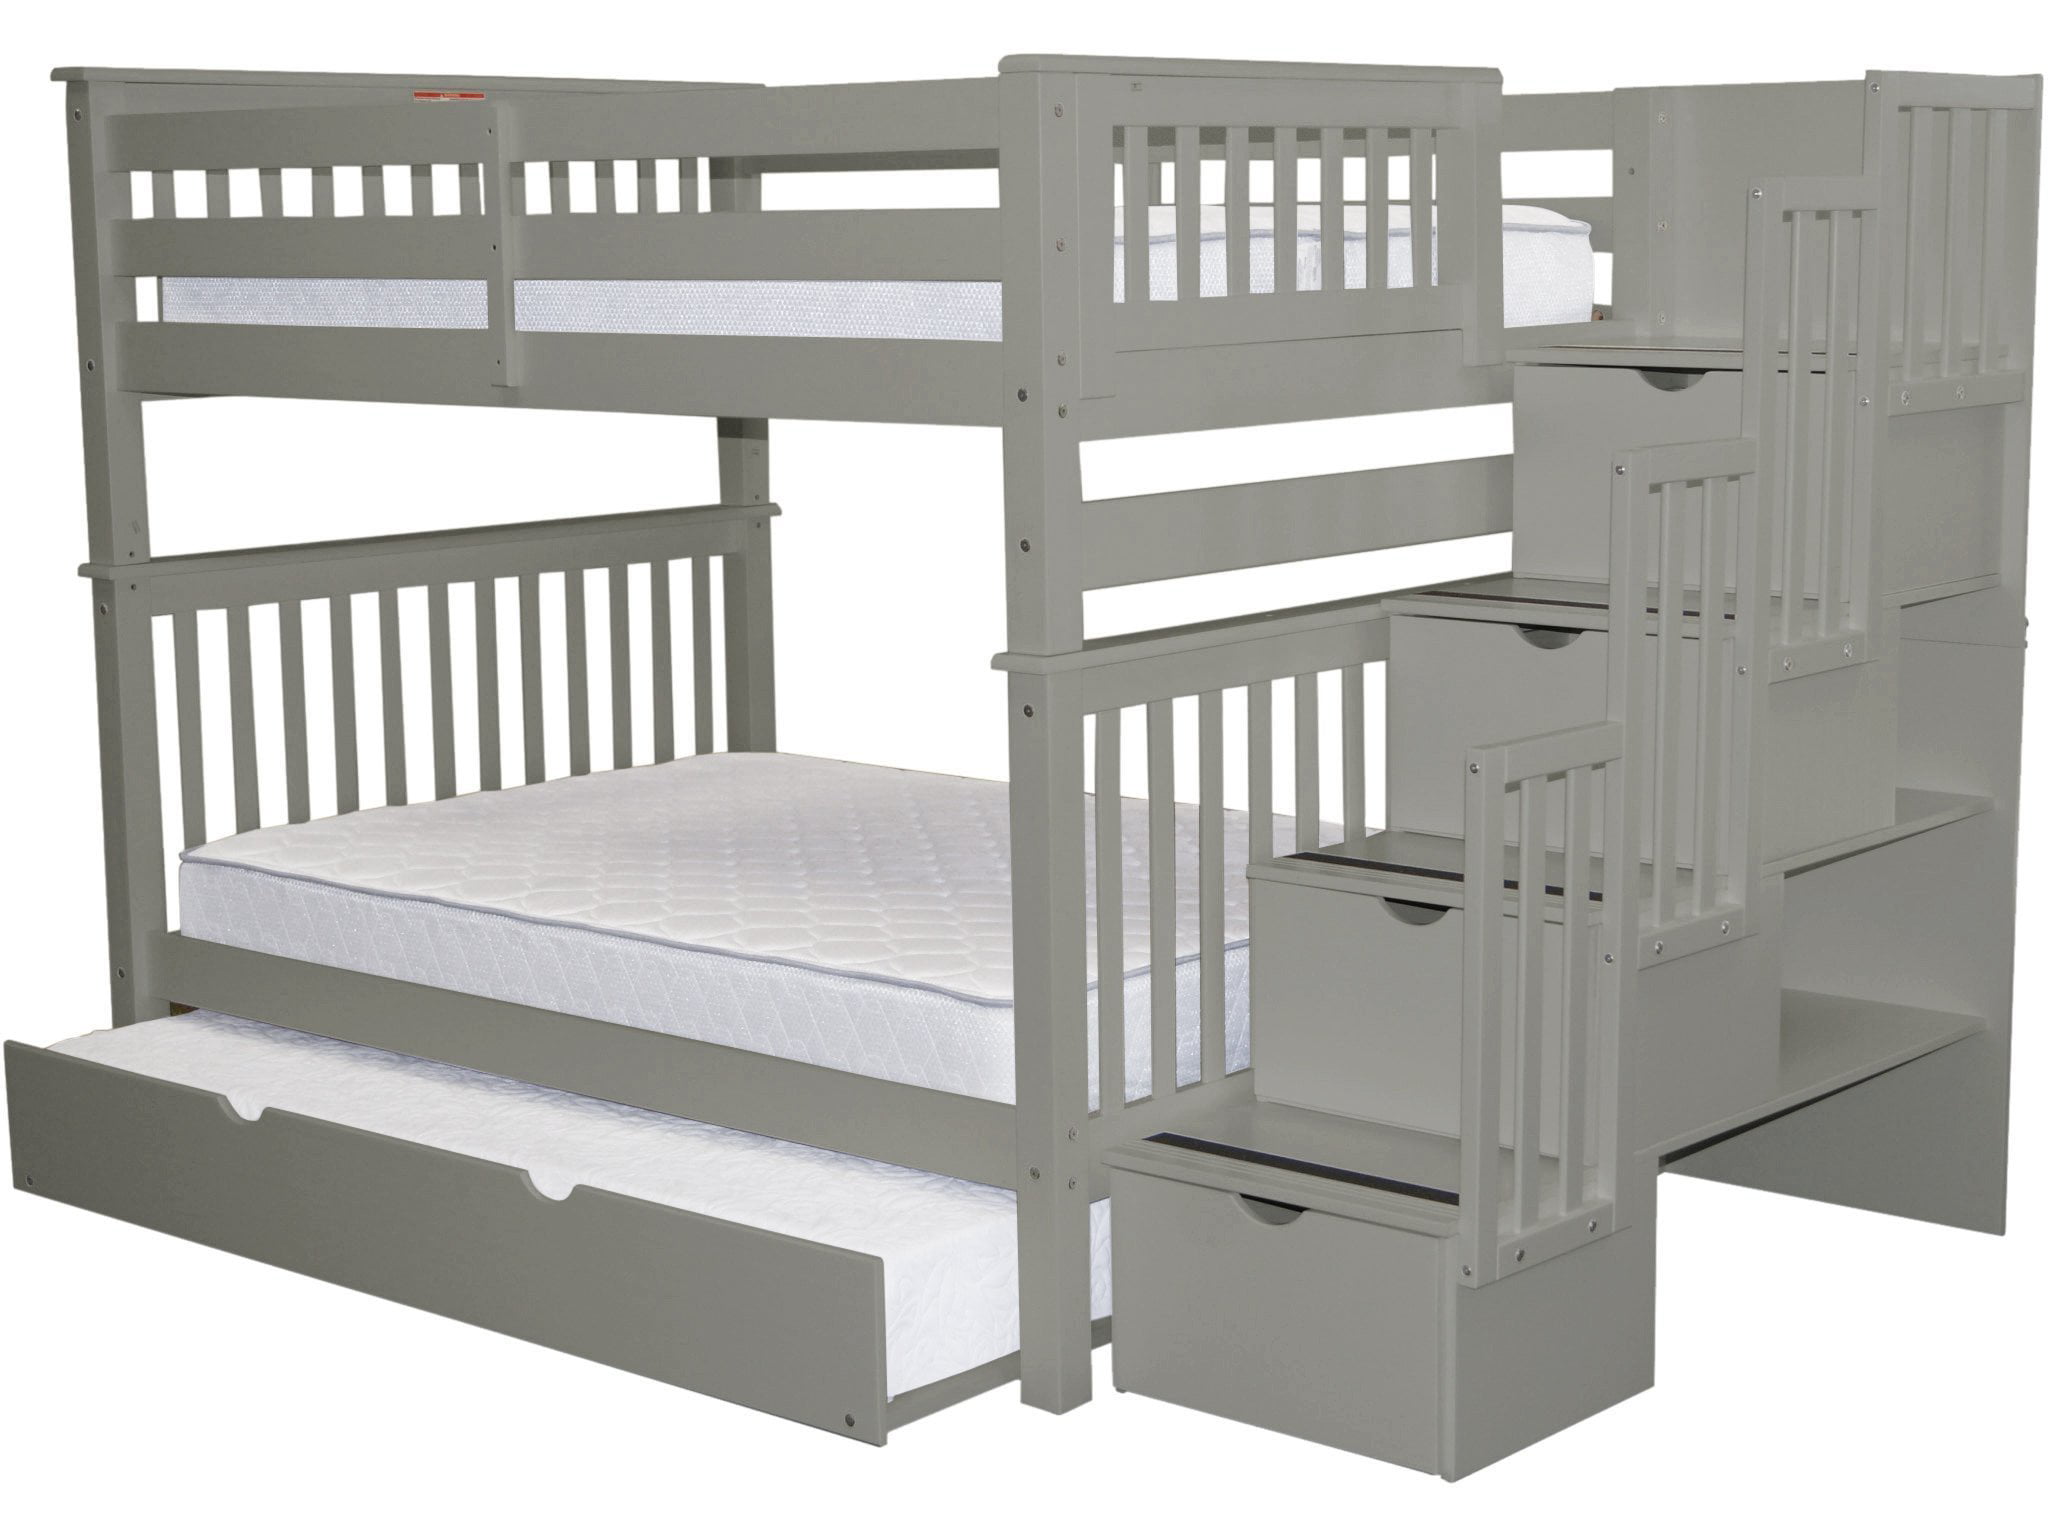 Bedz King Stairway Bunk Beds Full over Full with 4 Drawers in the Steps